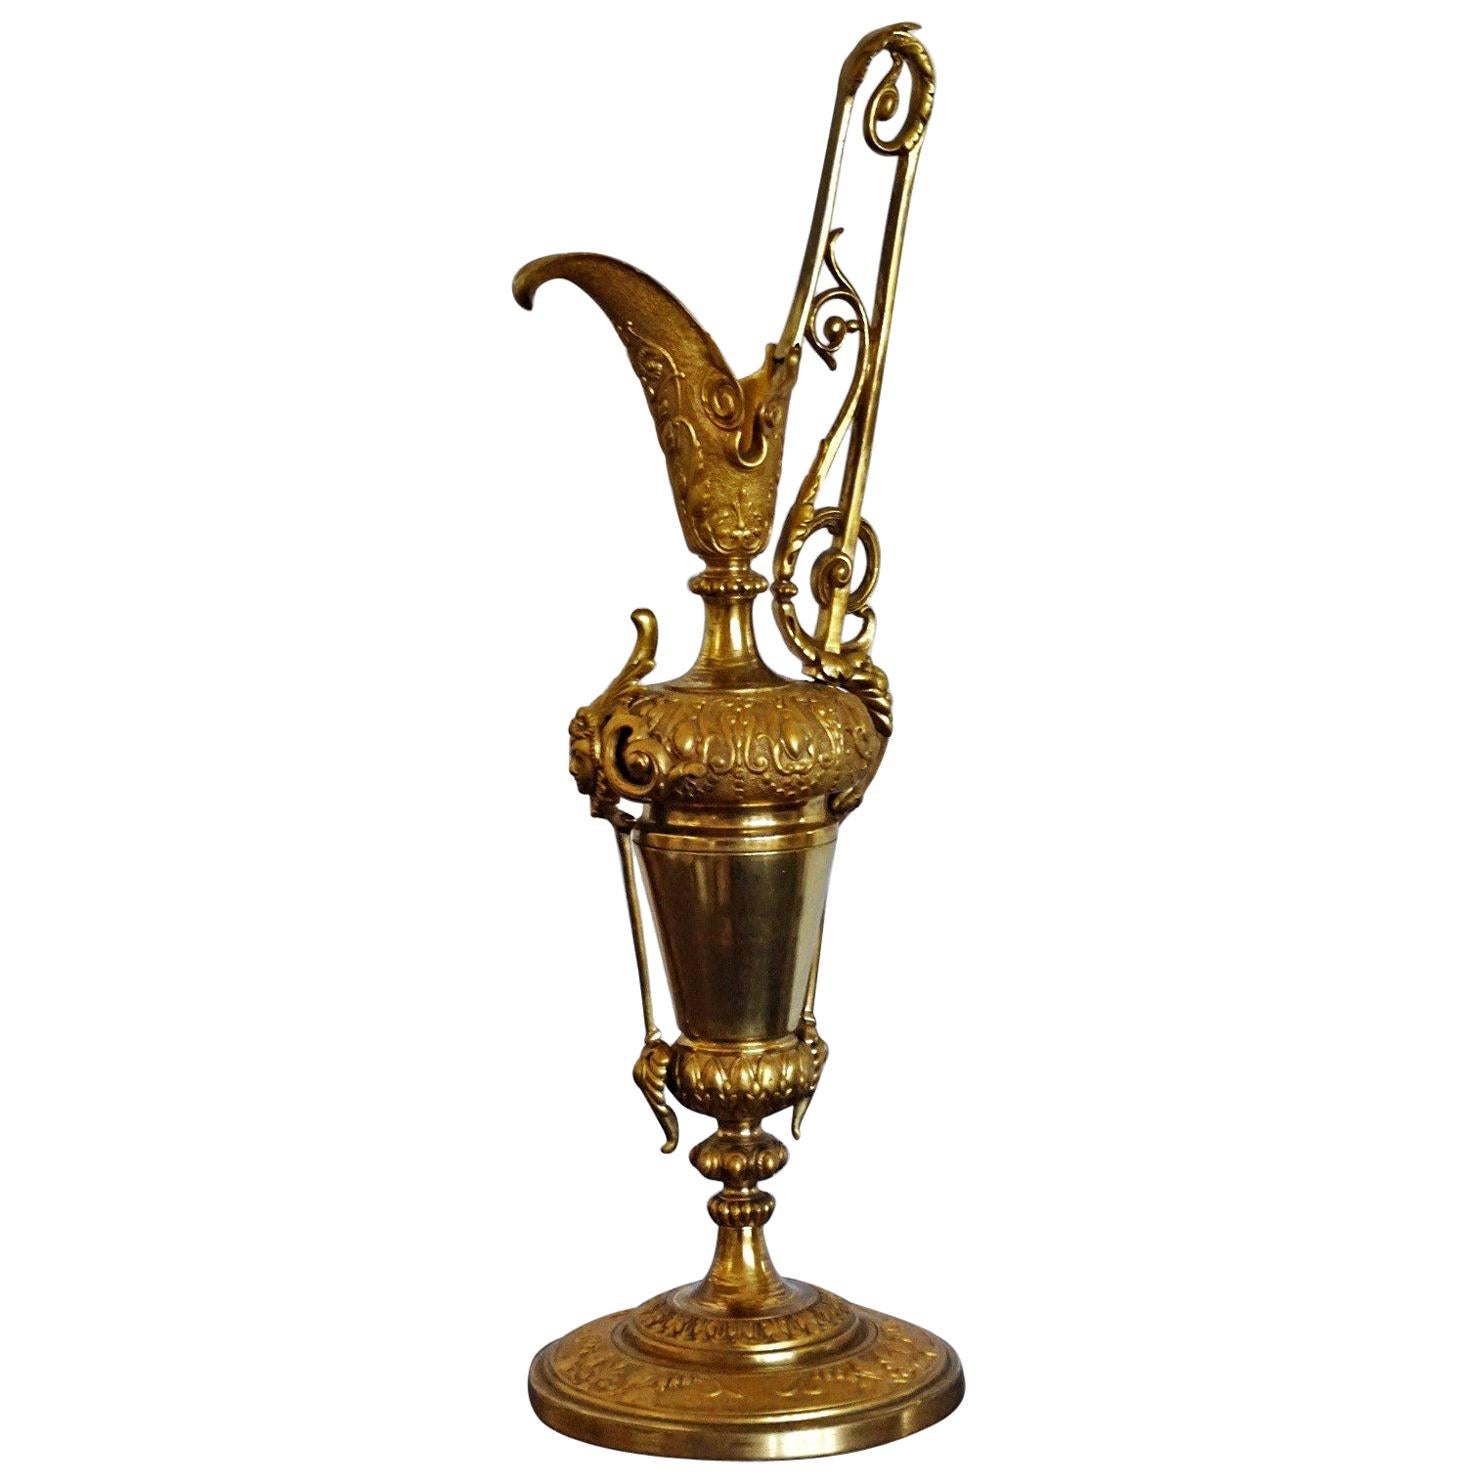 Early 20th Century Gilt Bronze Decorative Ewer, Pitcher For Sale